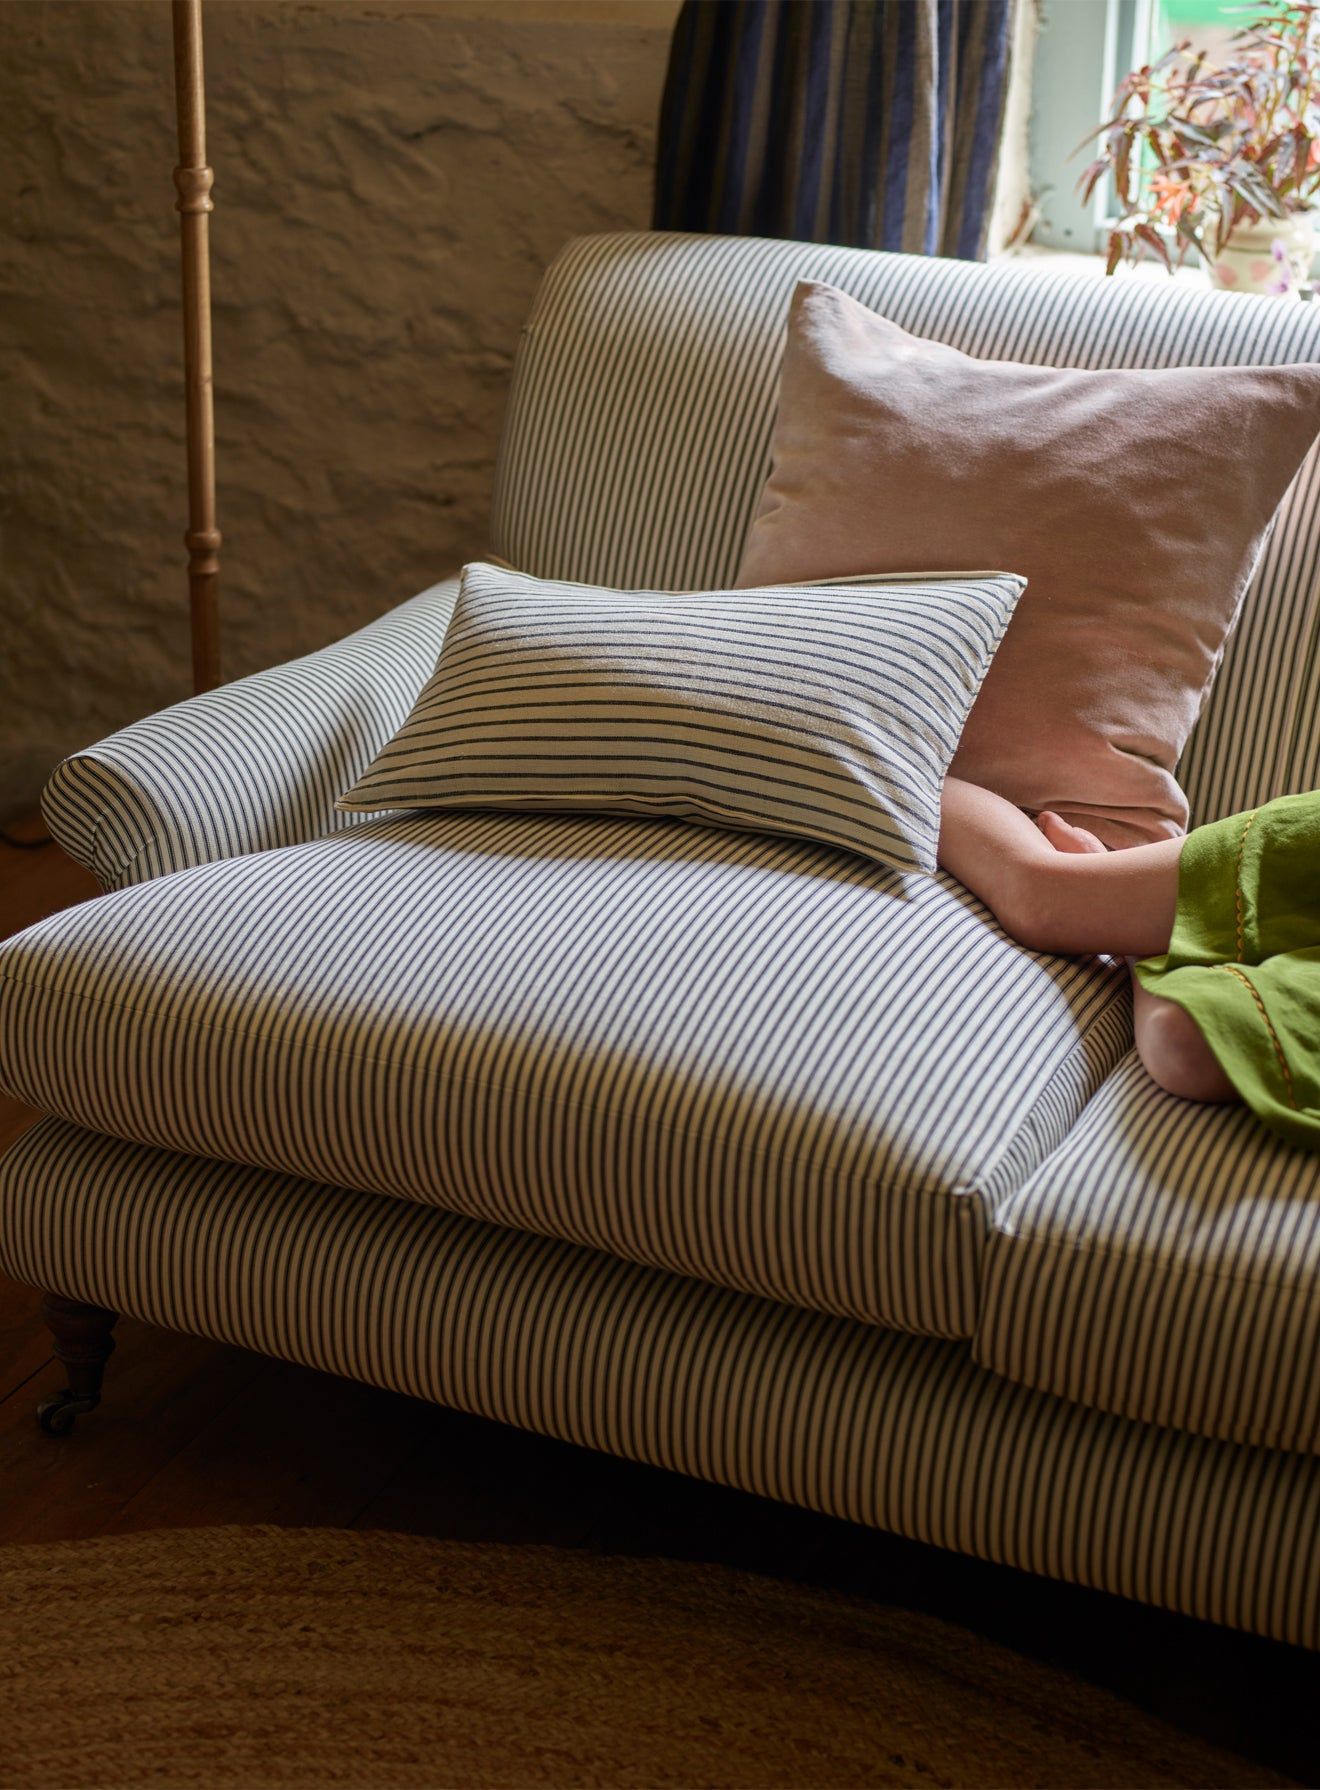 Choosing the Right Fabric for Your Sofa
Upholstery